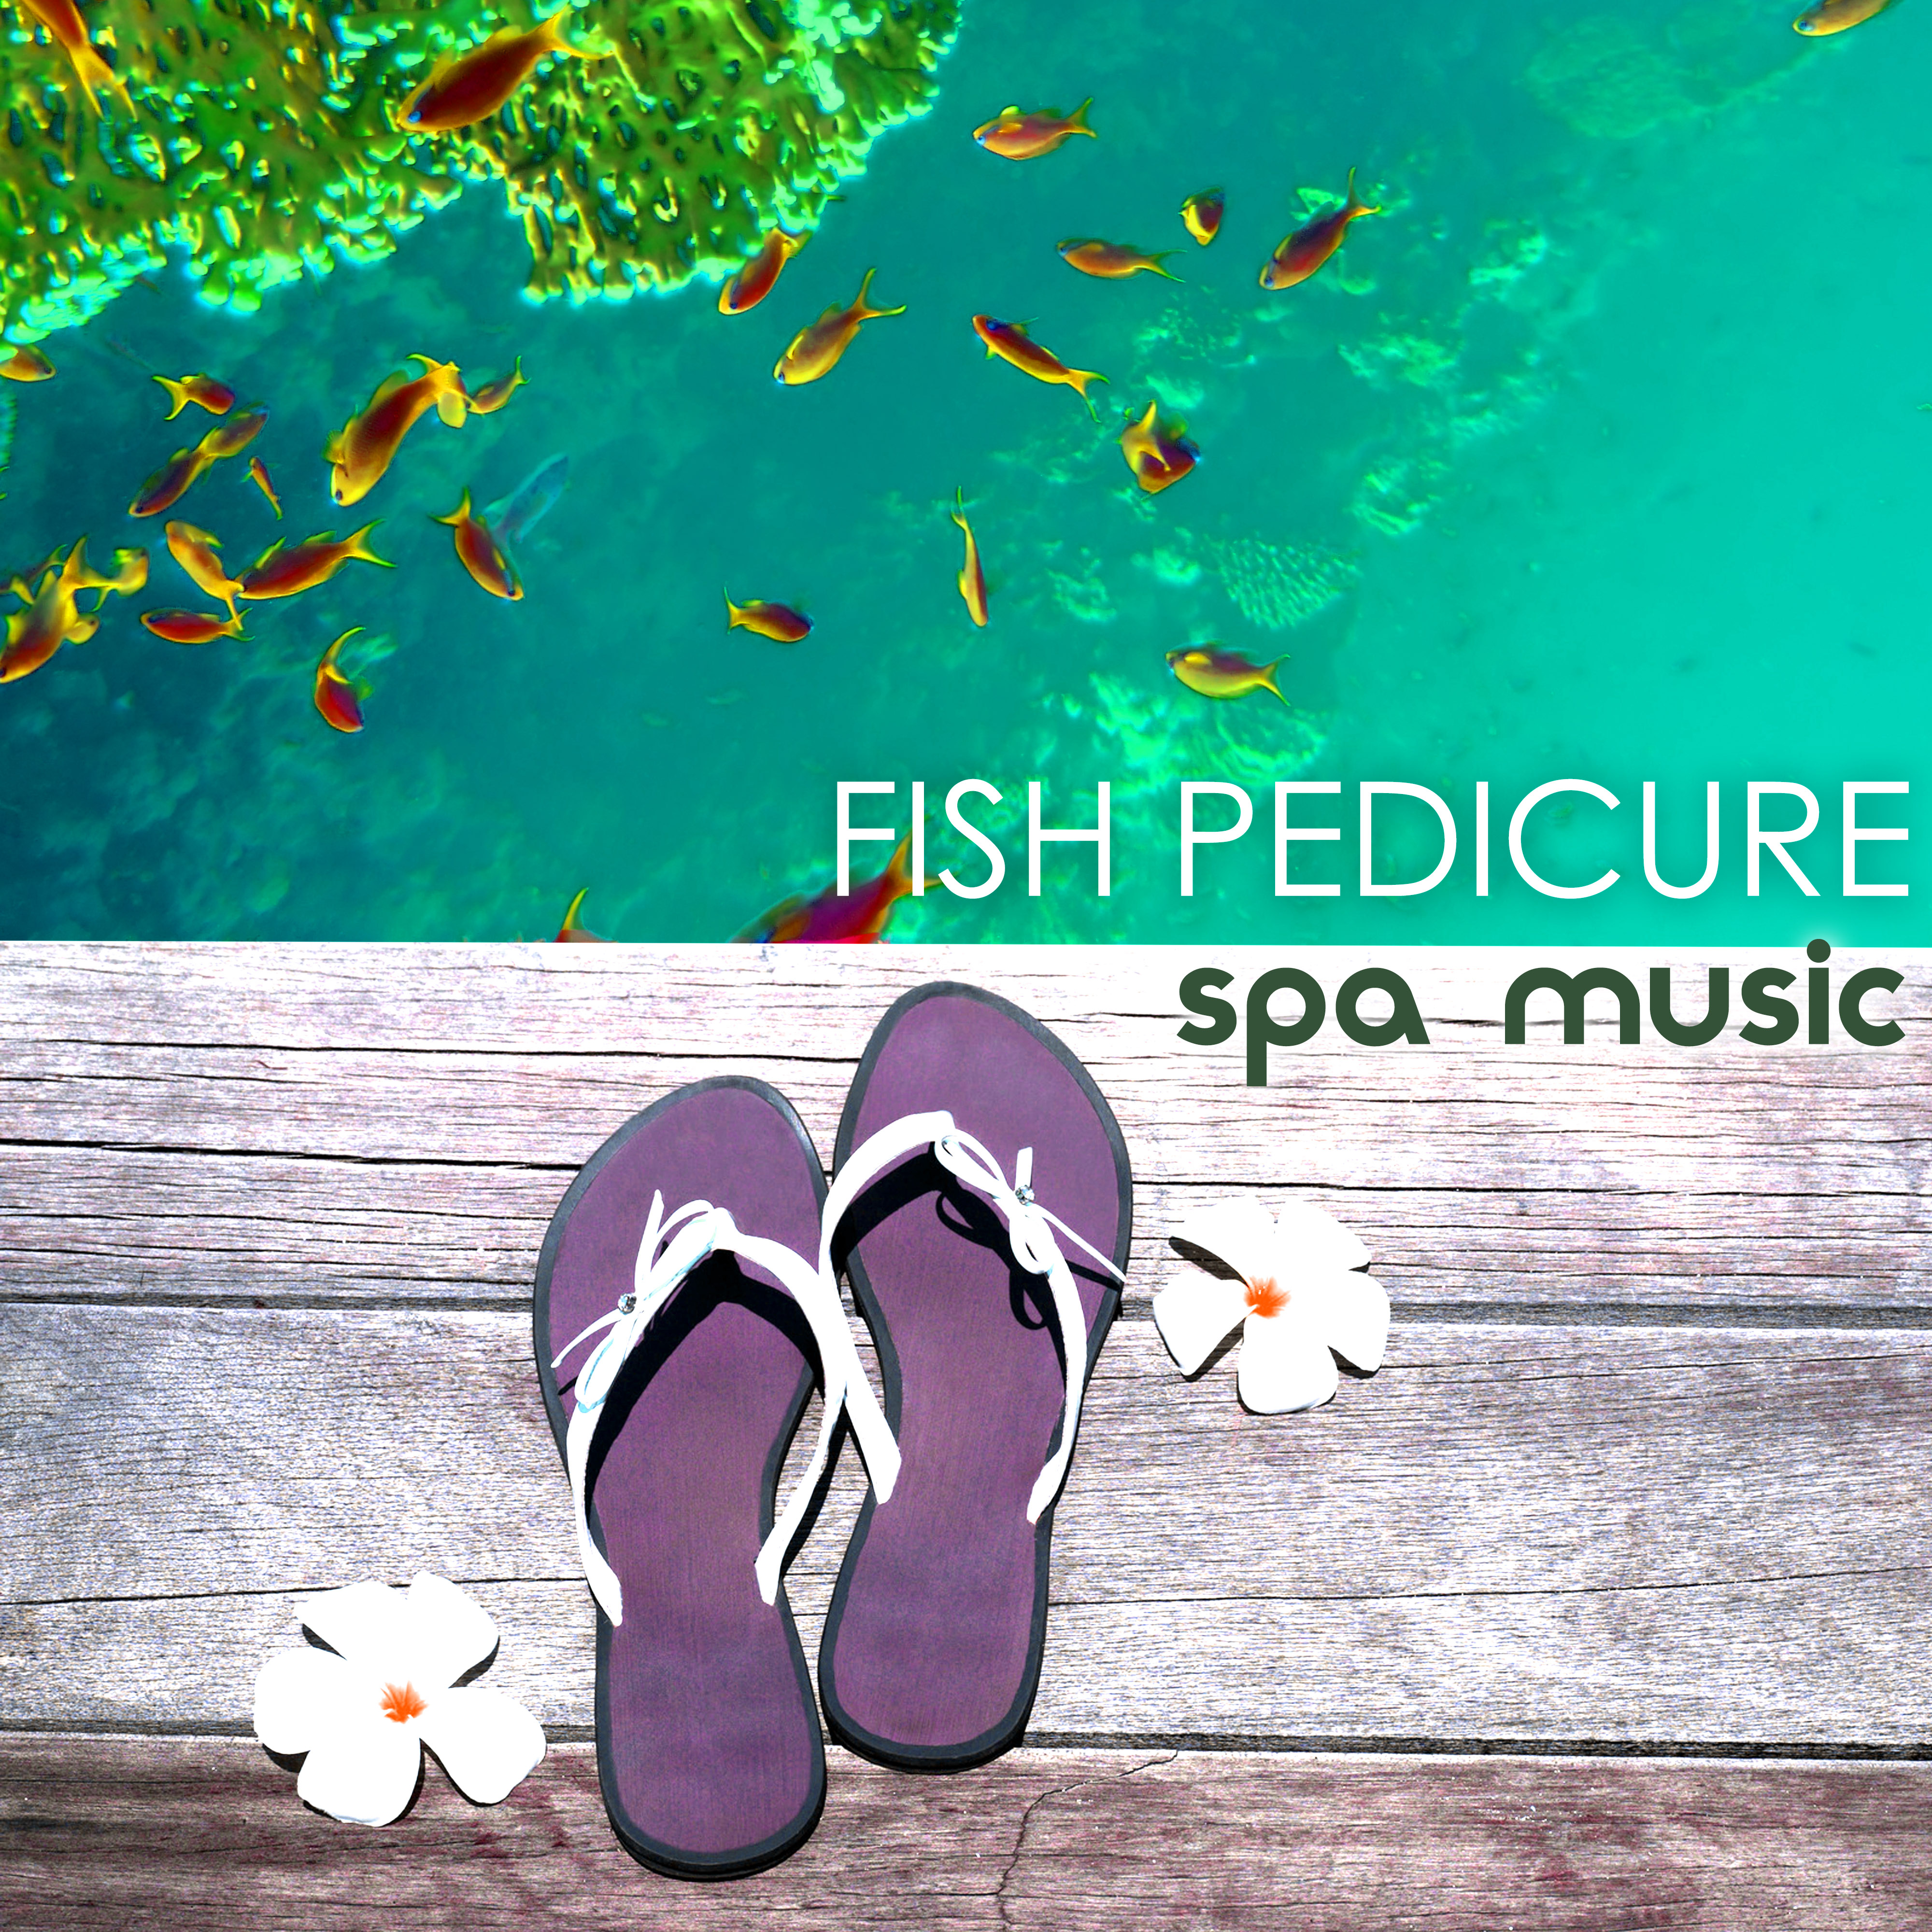 Fish Pedicure Spa Music  Peaceful Relaxing Music for Fish Therapy, Pedicure, Massage  Fish Foot Spa in Beauty Center